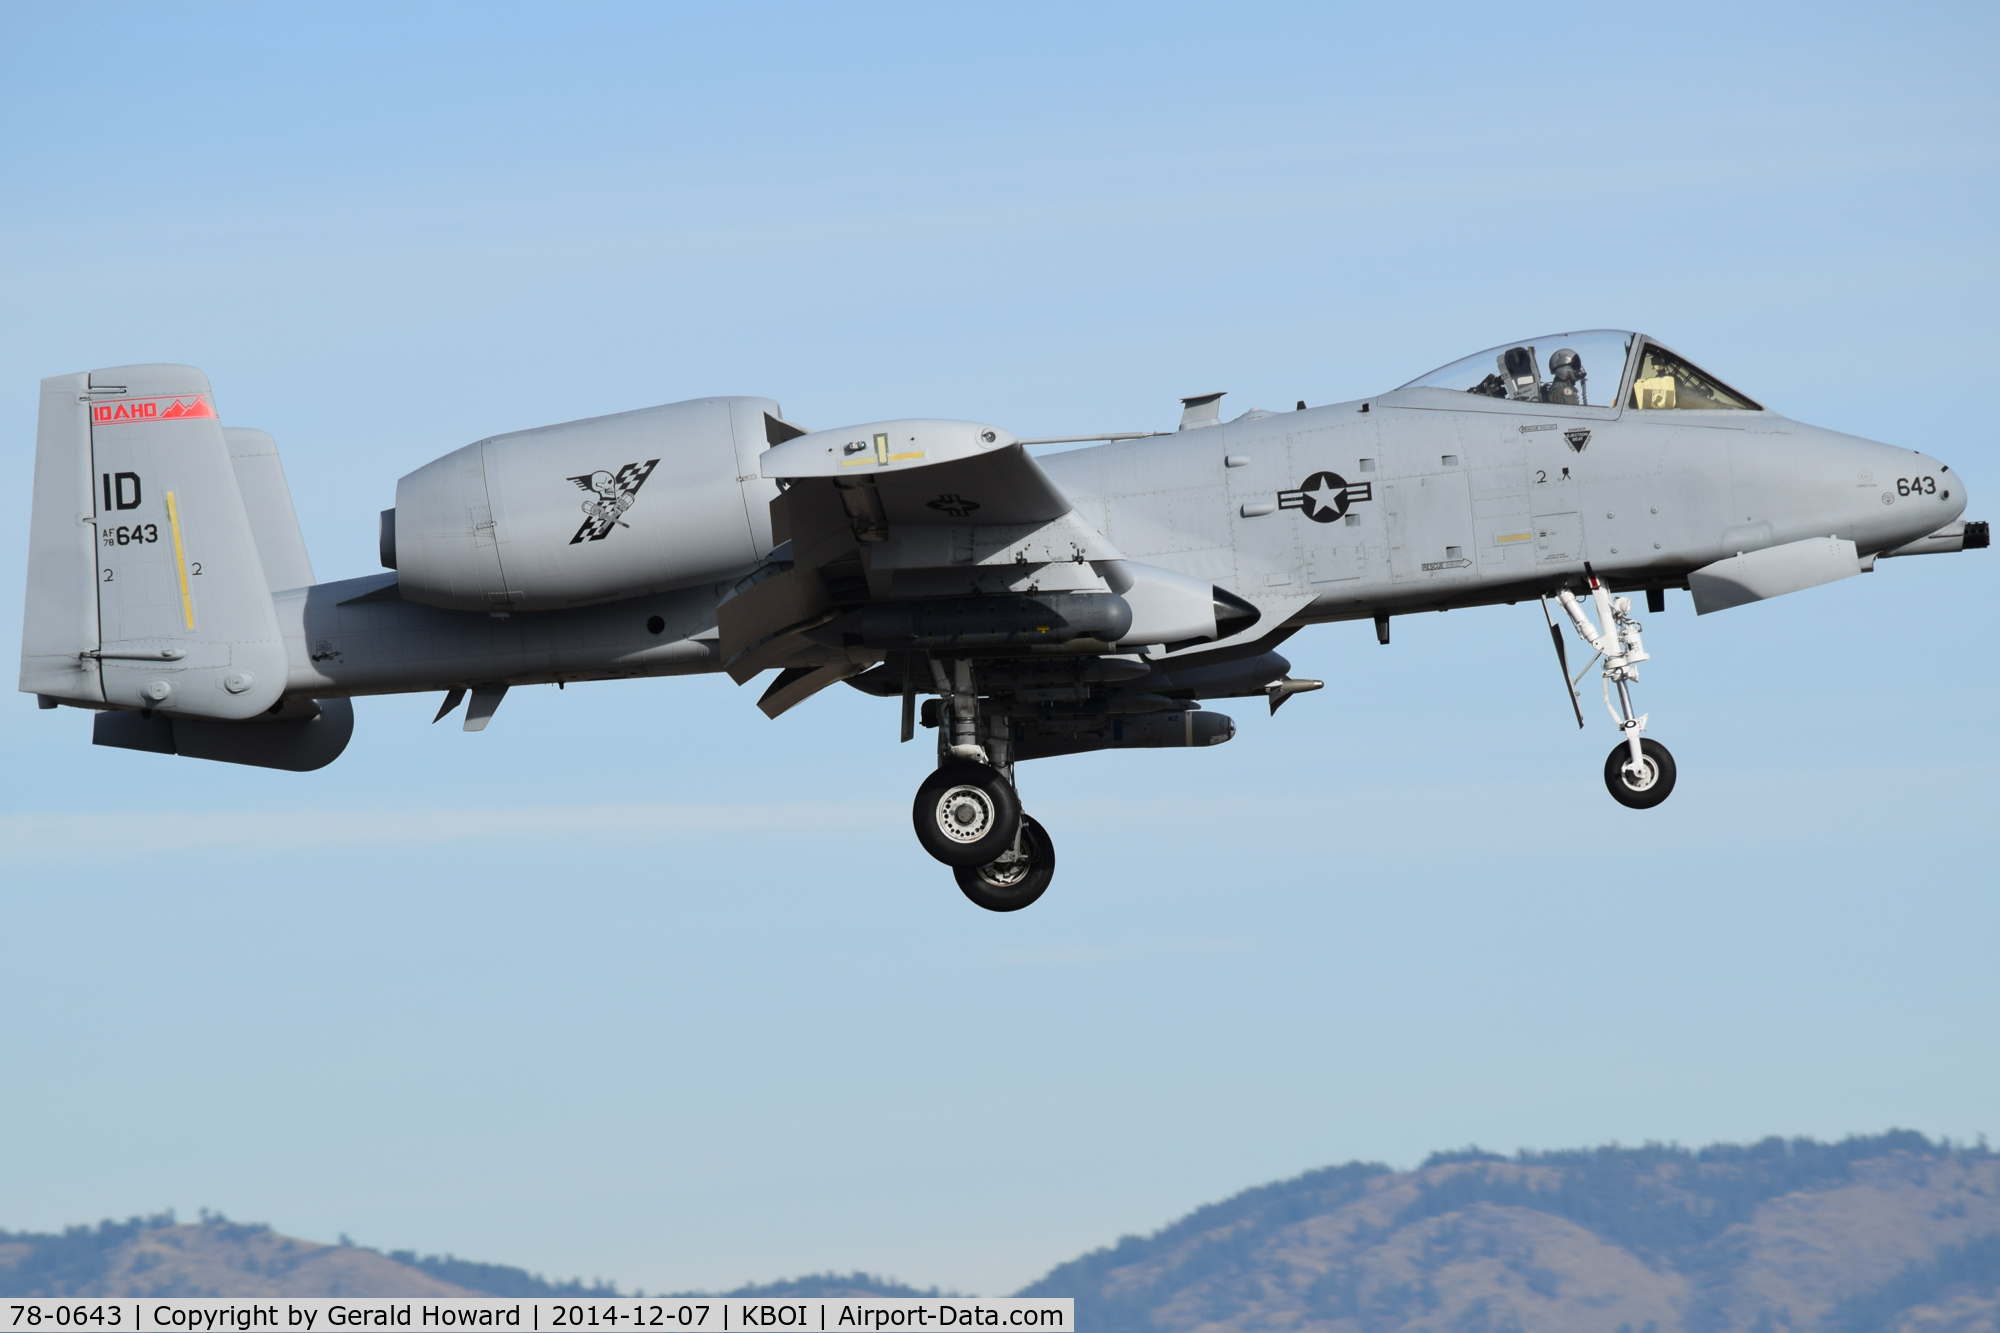 78-0643, 1978 Fairchild Republic A-10C Thunderbolt II C/N A10-0263, Over the numbers for RWY 10R.